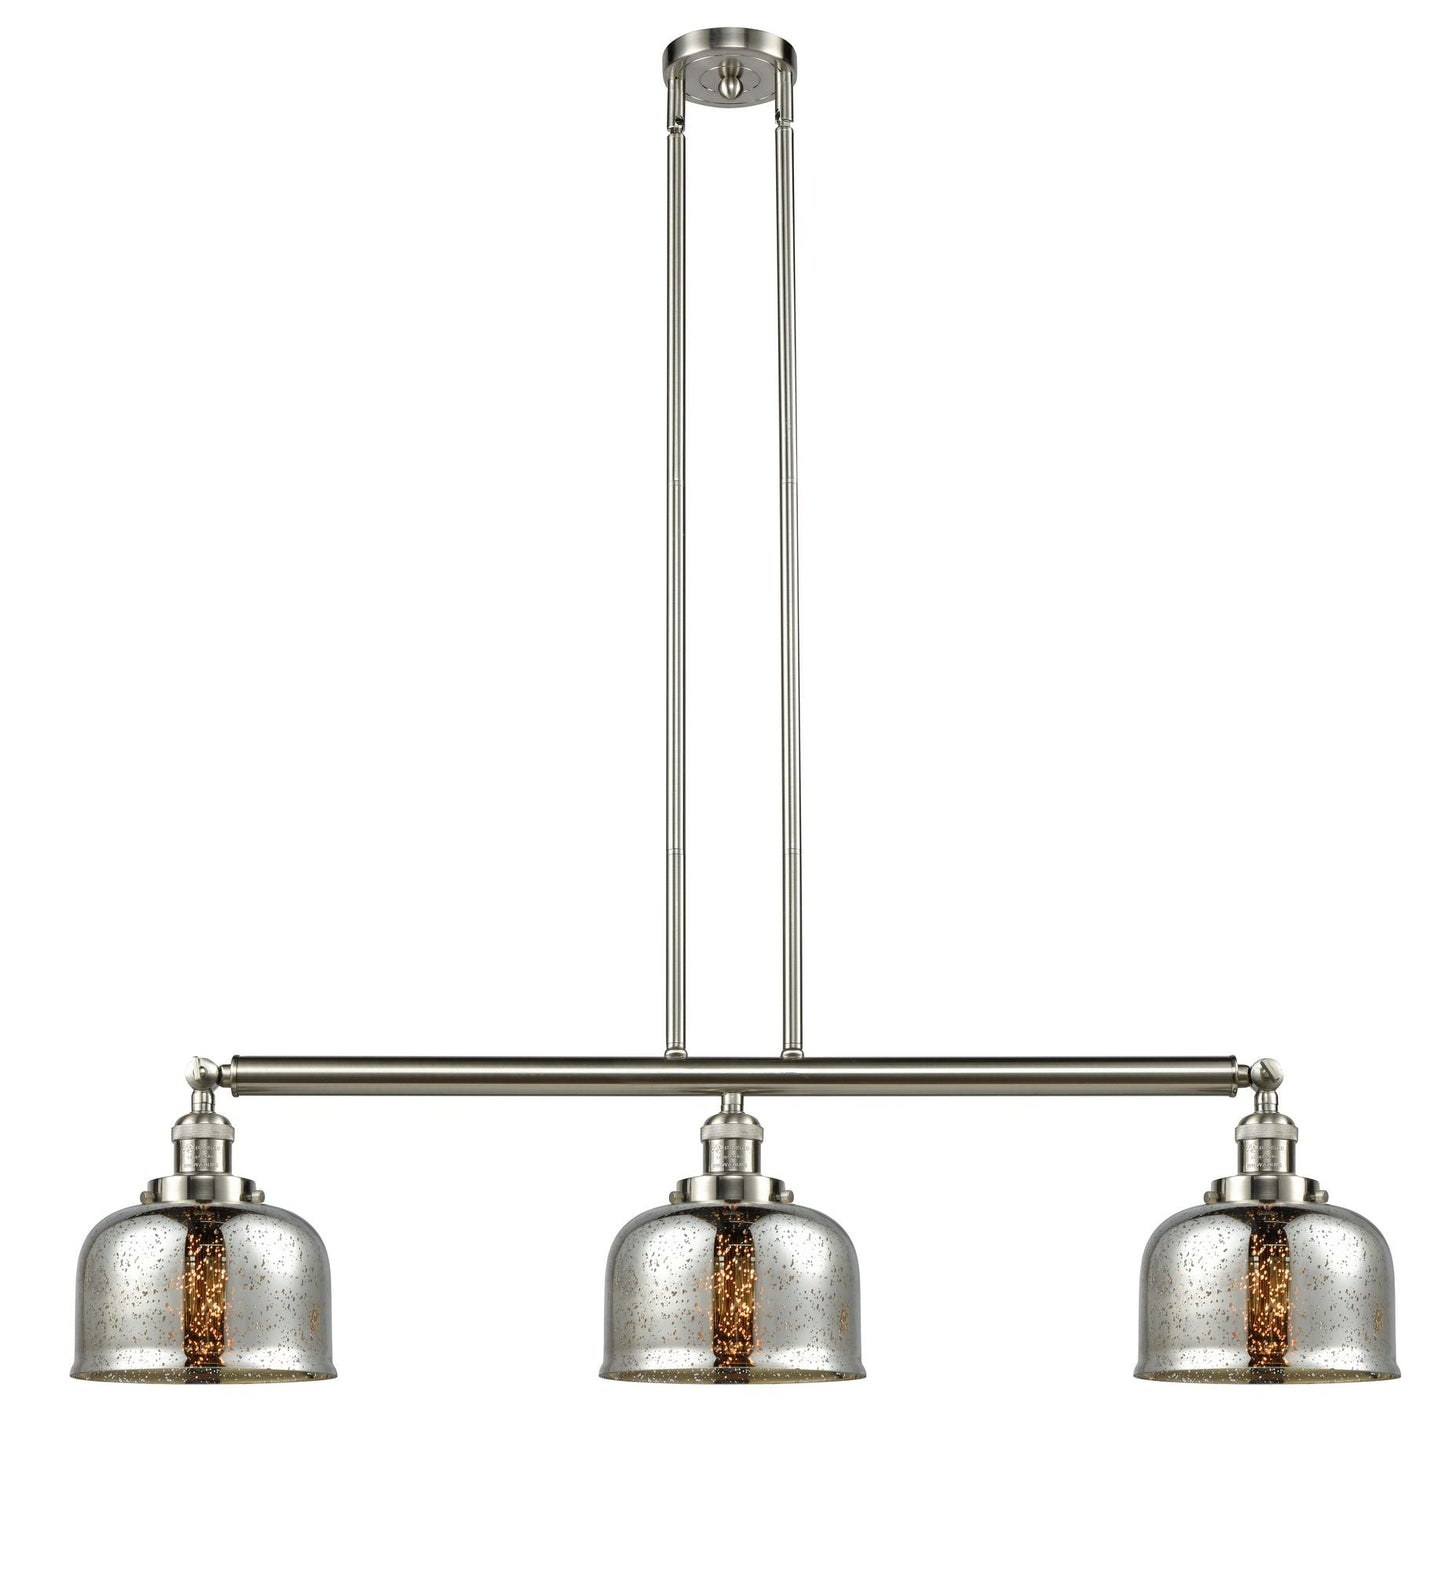 213-SN-G78 3-Light 40.5" Brushed Satin Nickel Island Light - Silver Plated Mercury Large Bell Glass - LED Bulb - Dimmensions: 40.5 x 8 x 13<br>Minimum Height : 20<br>Maximum Height : 44 - Sloped Ceiling Compatible: Yes